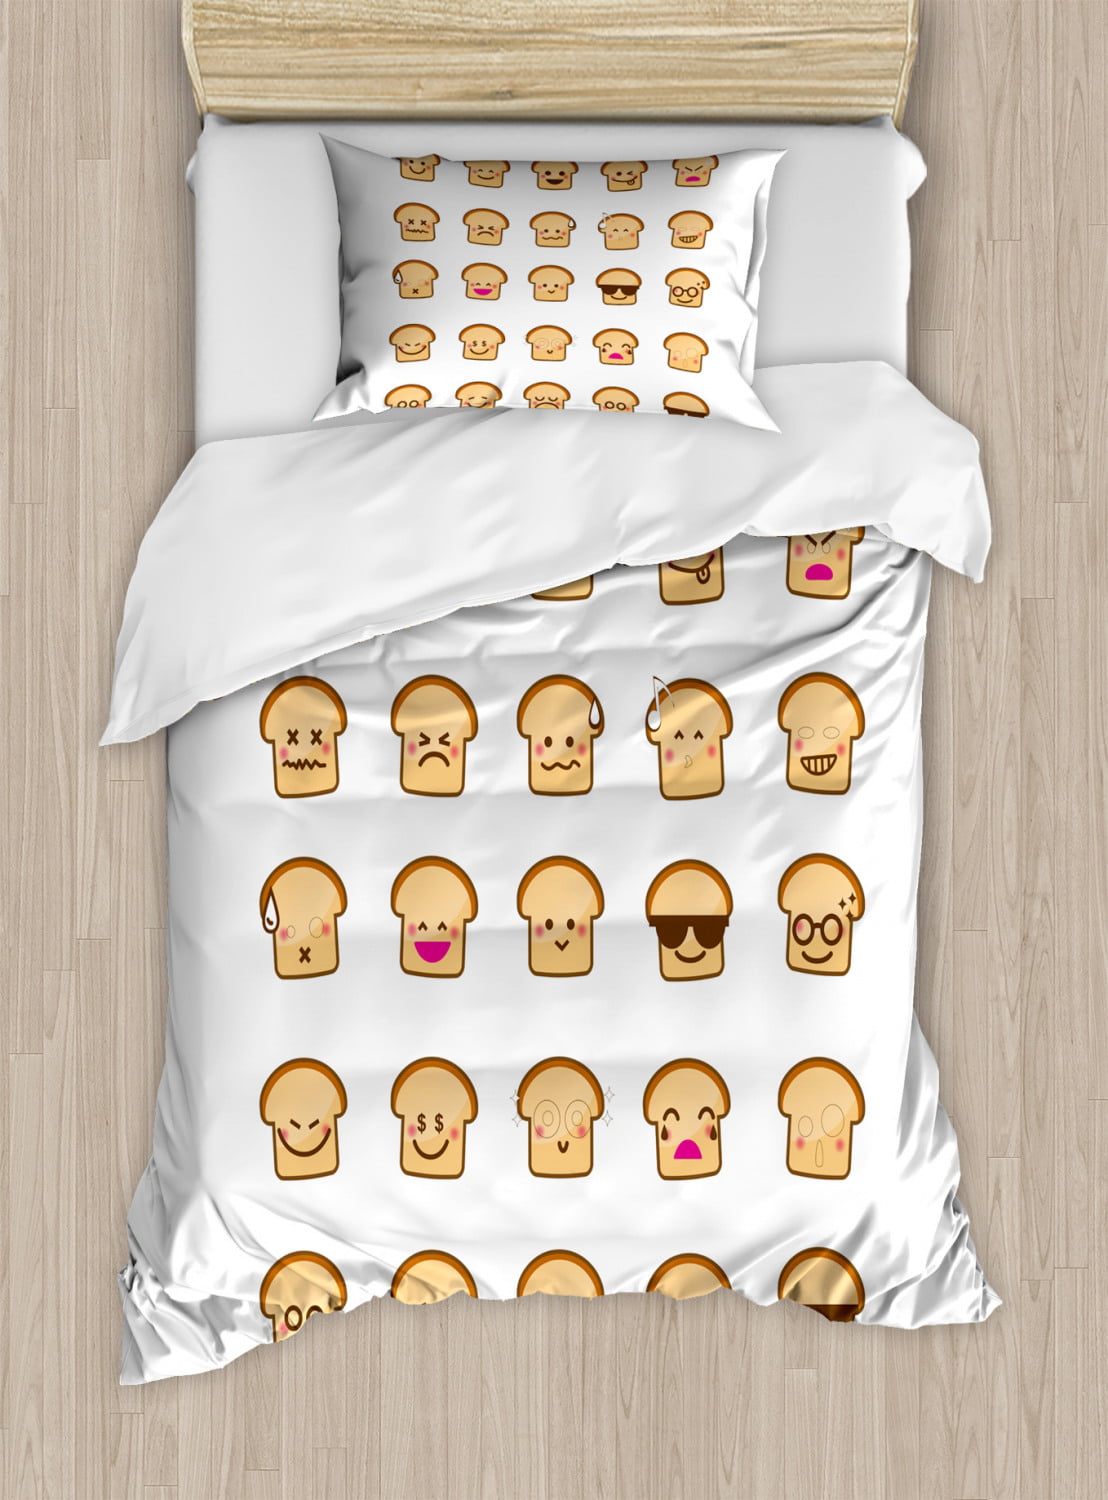 Luxury ICON Print Duvet Cover Bed Set with Pillow Cases Emoji Single Double King 